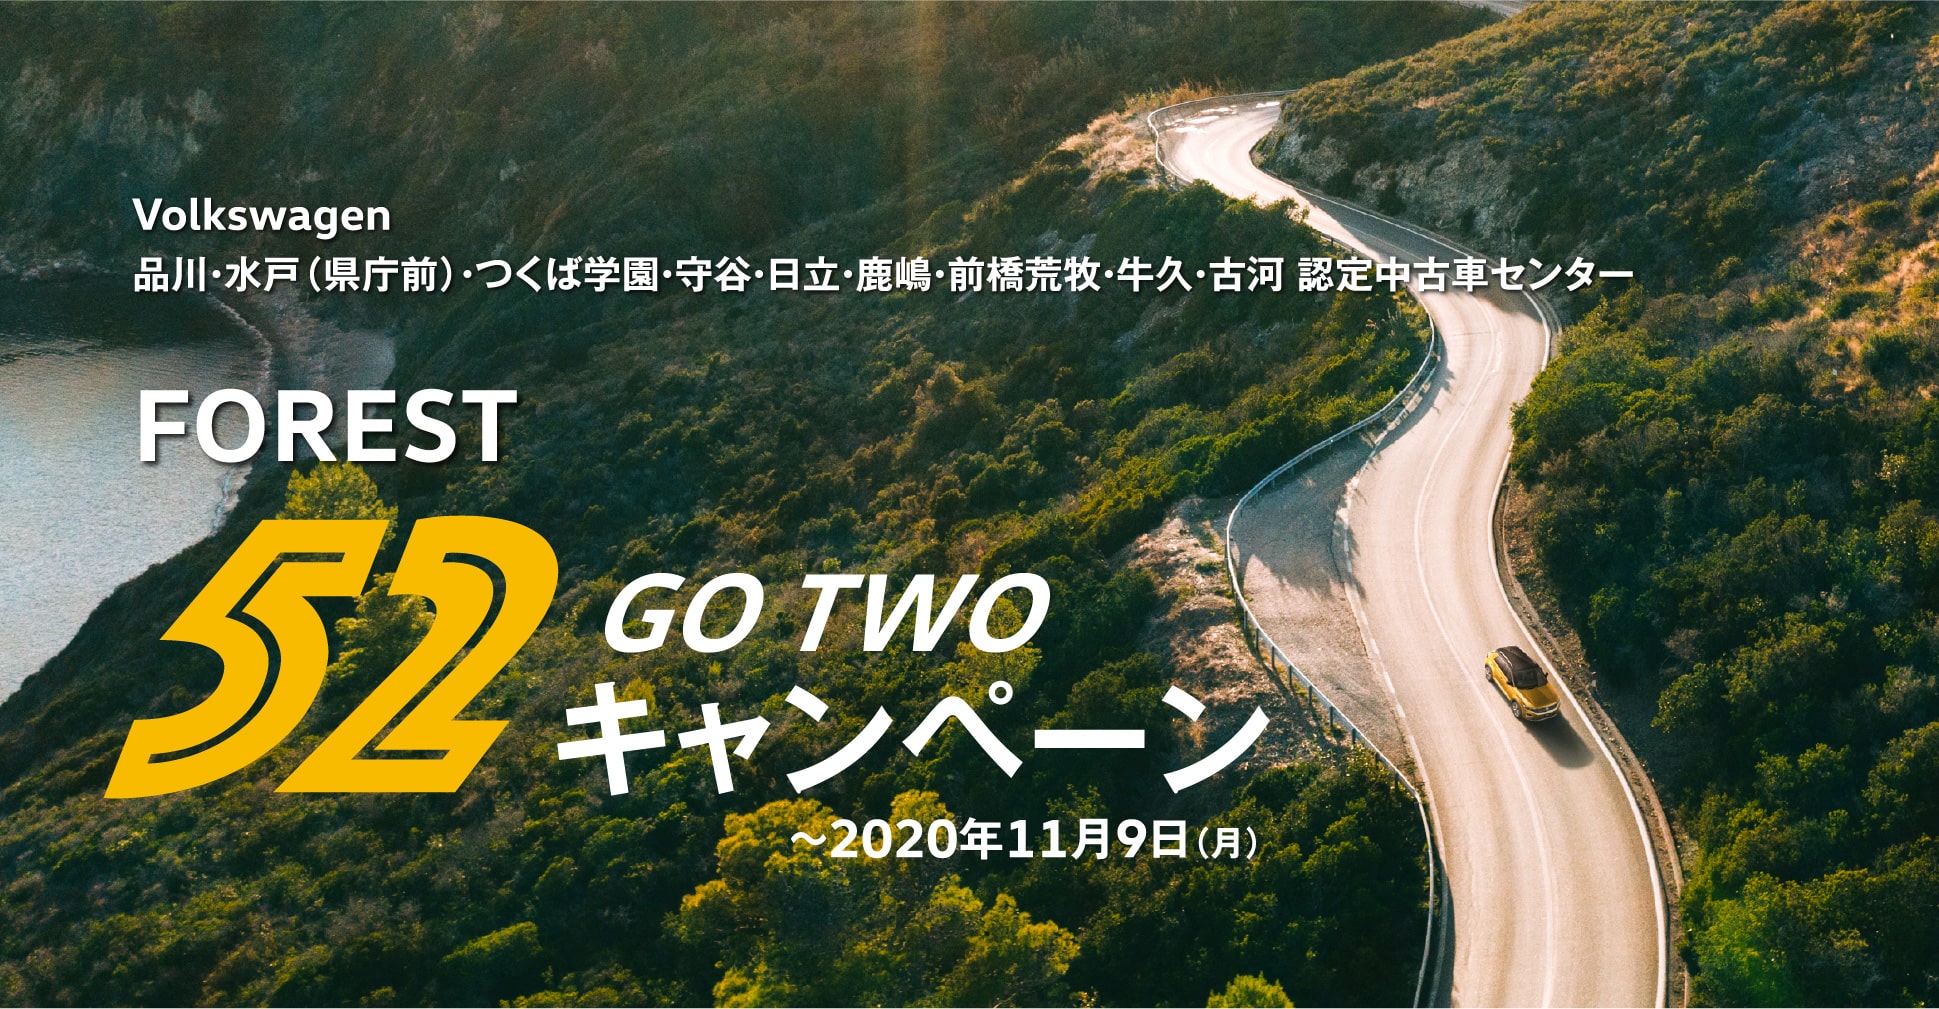 FOREST GO TWO キャンペーン